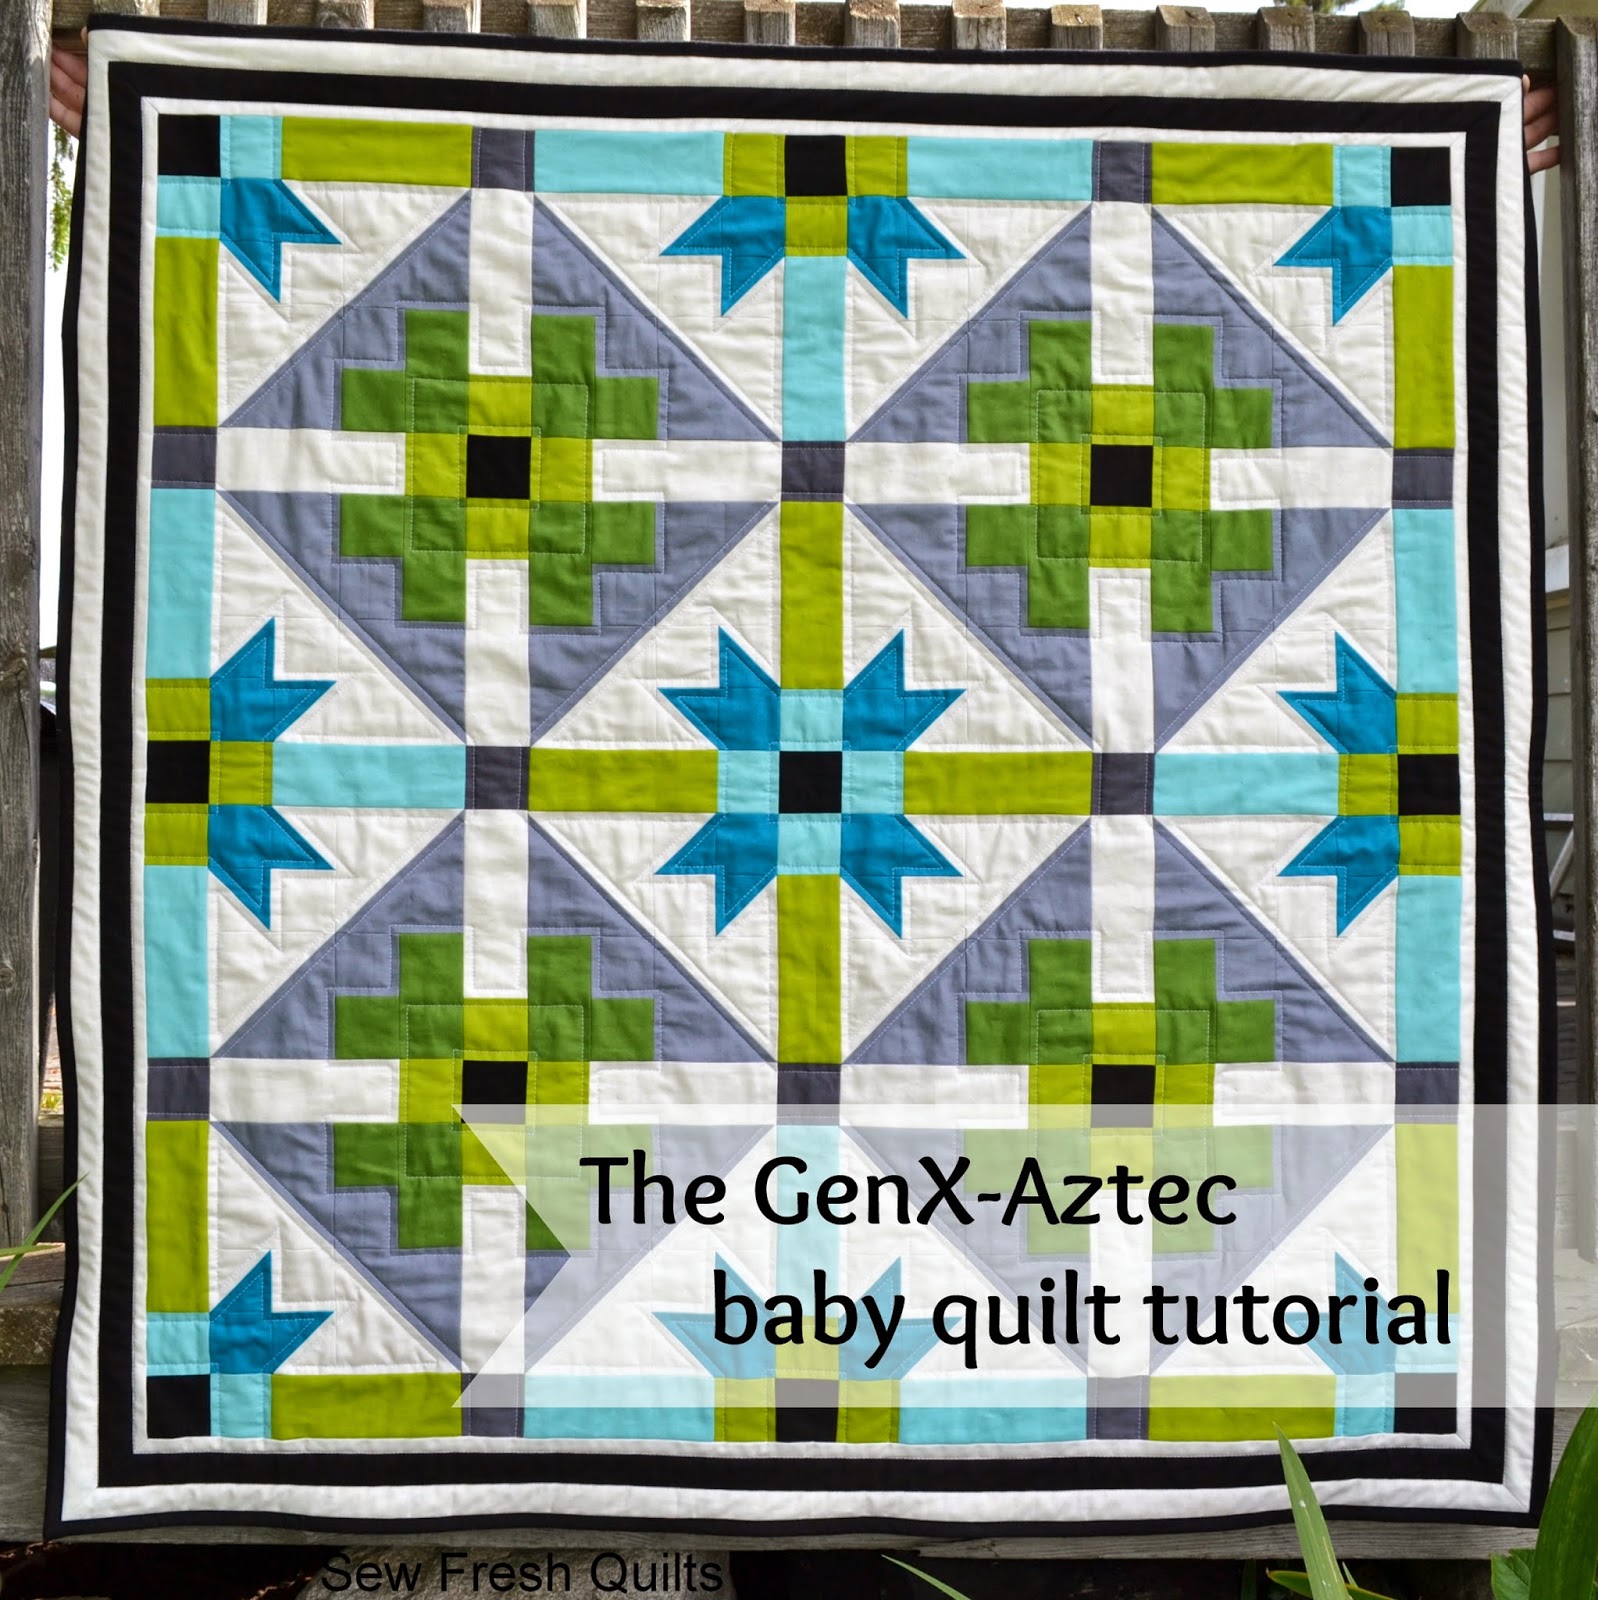 http://sewfreshquilts.blogspot.ca/2014/07/genx-aztec-baby-quilt-with-tutorial.html